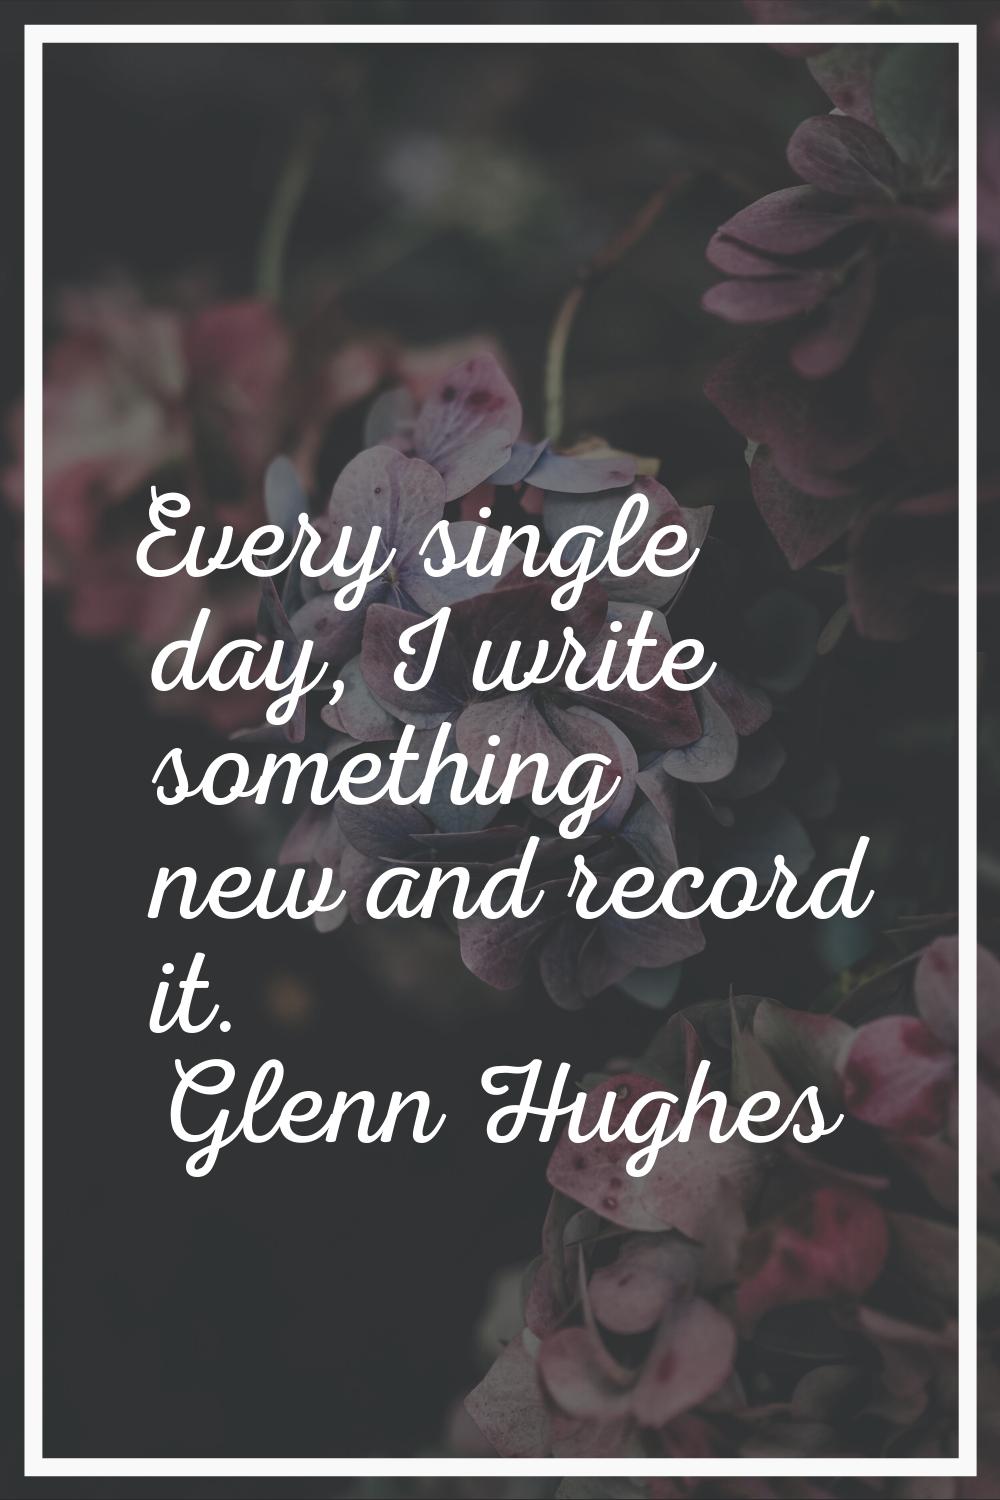 Every single day, I write something new and record it.